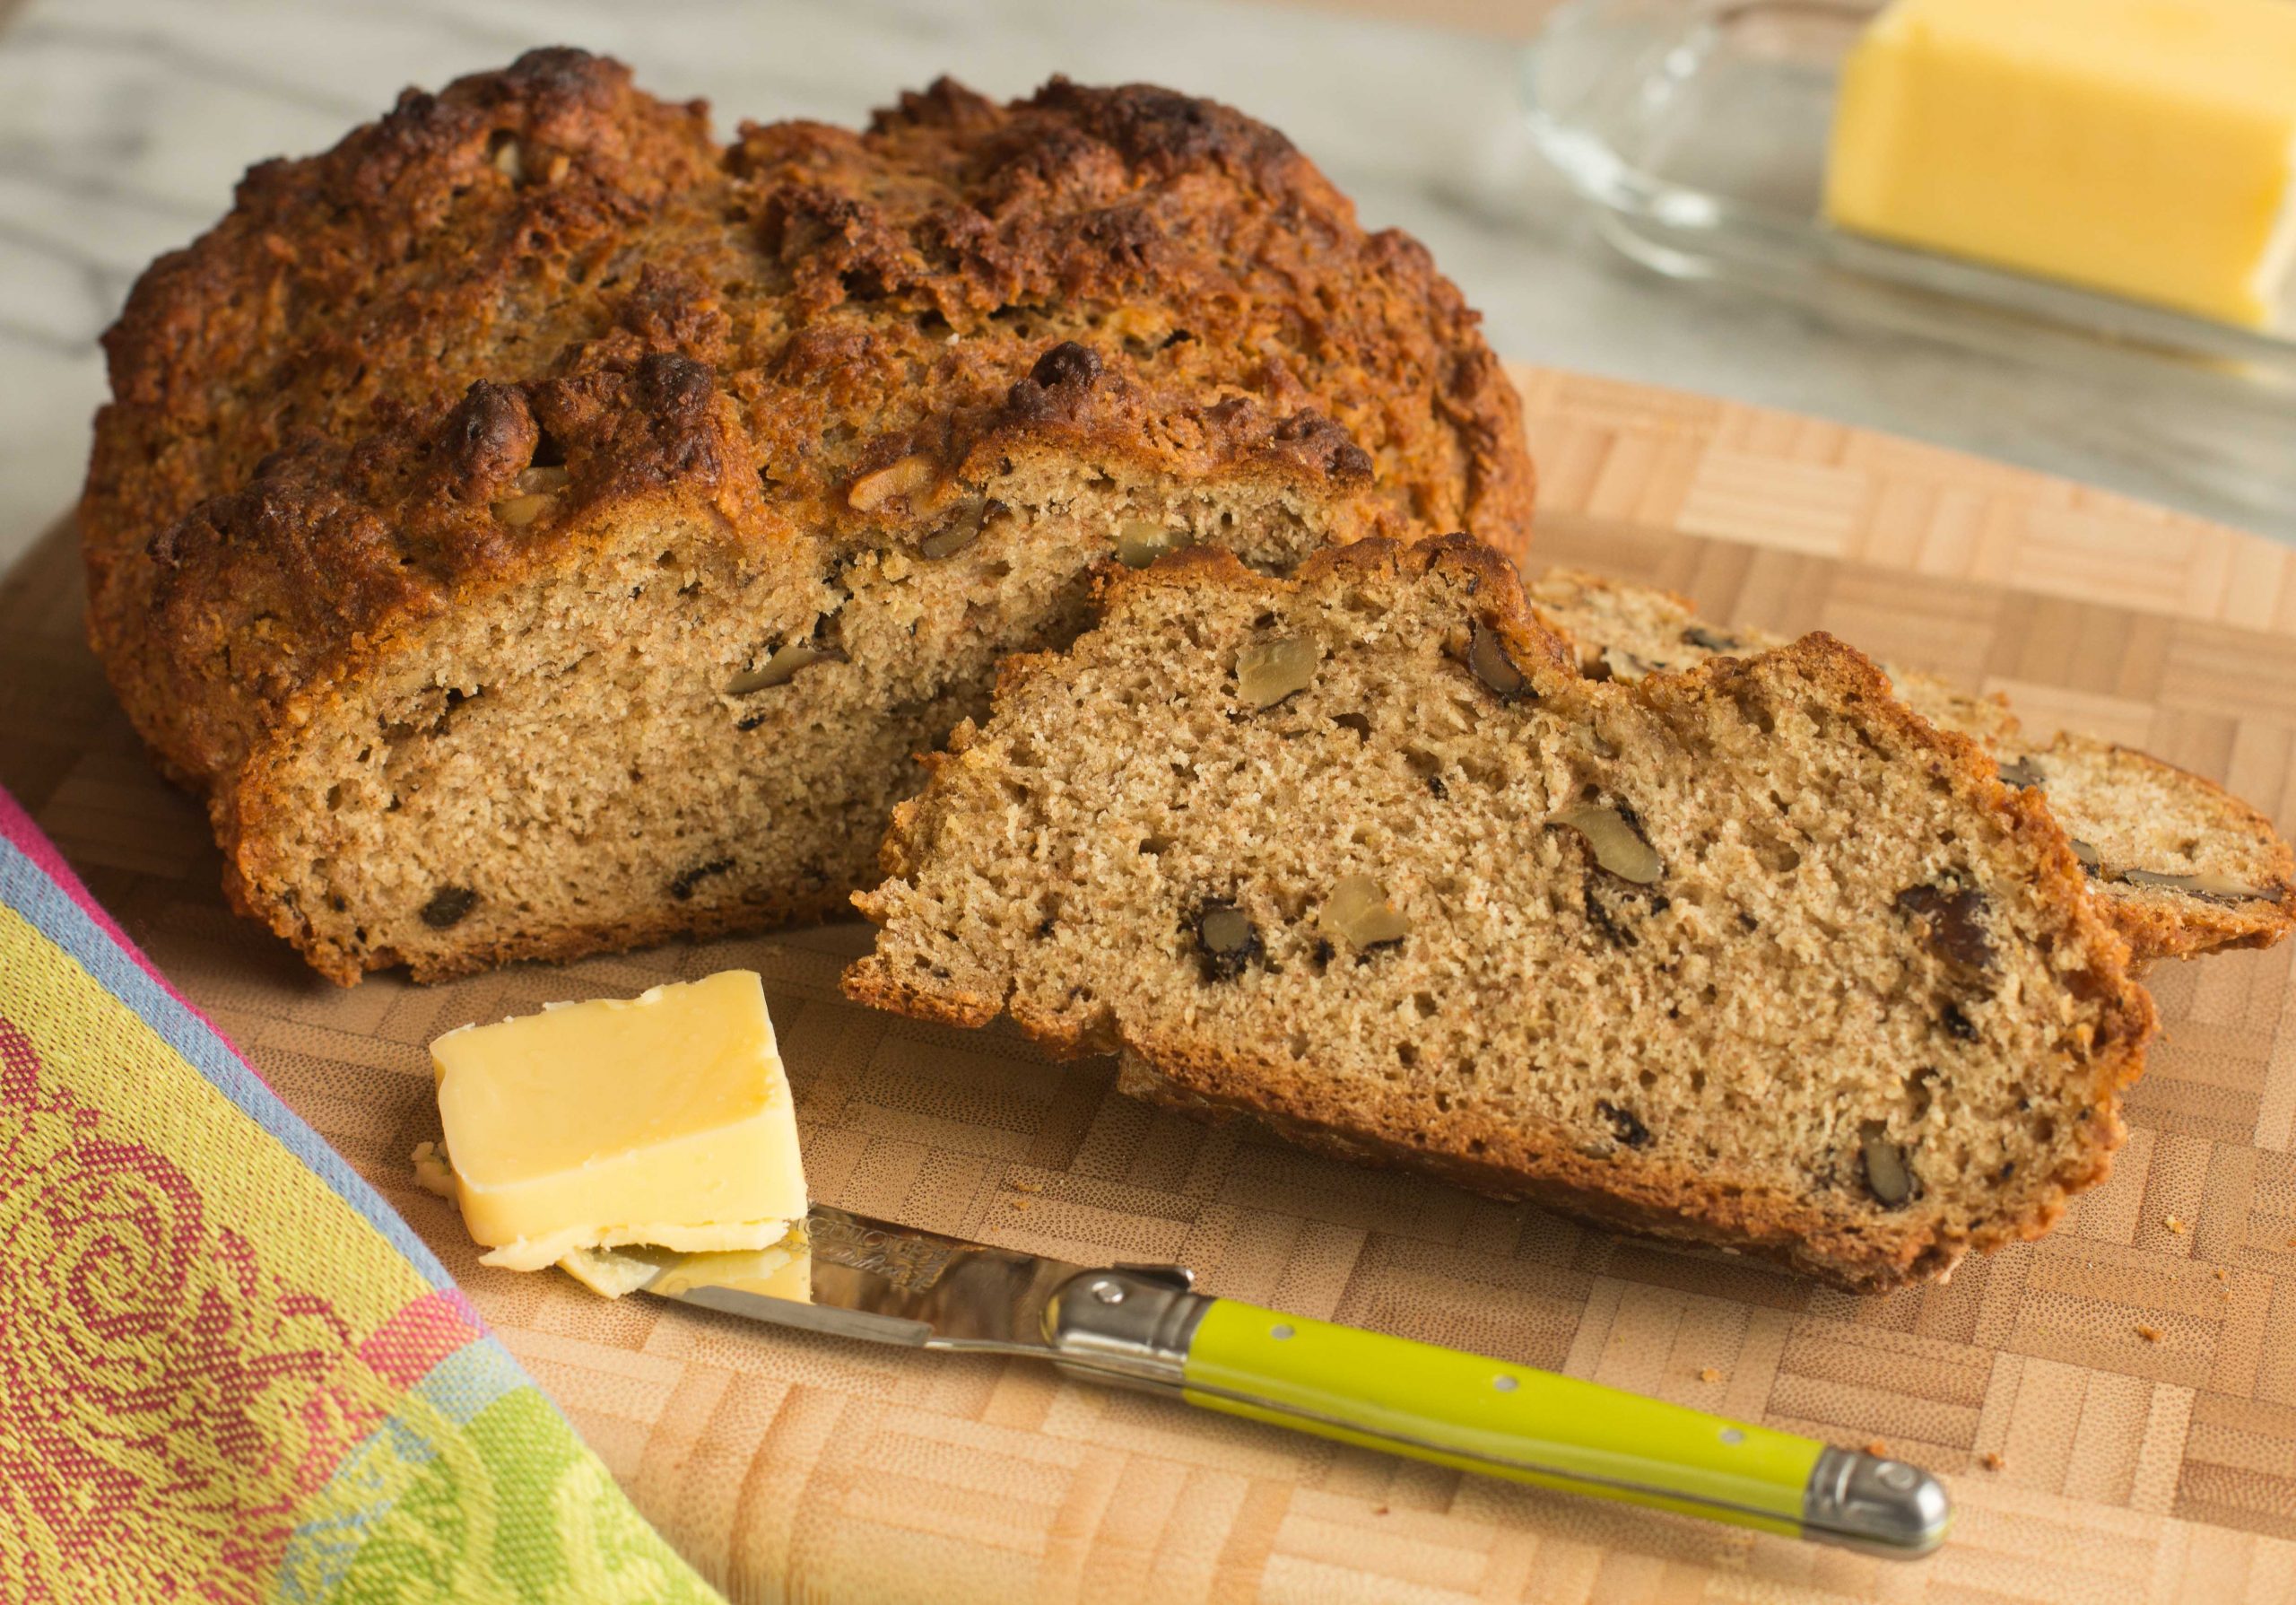 Quick Soda Bread with Whole Wheat and Walnuts